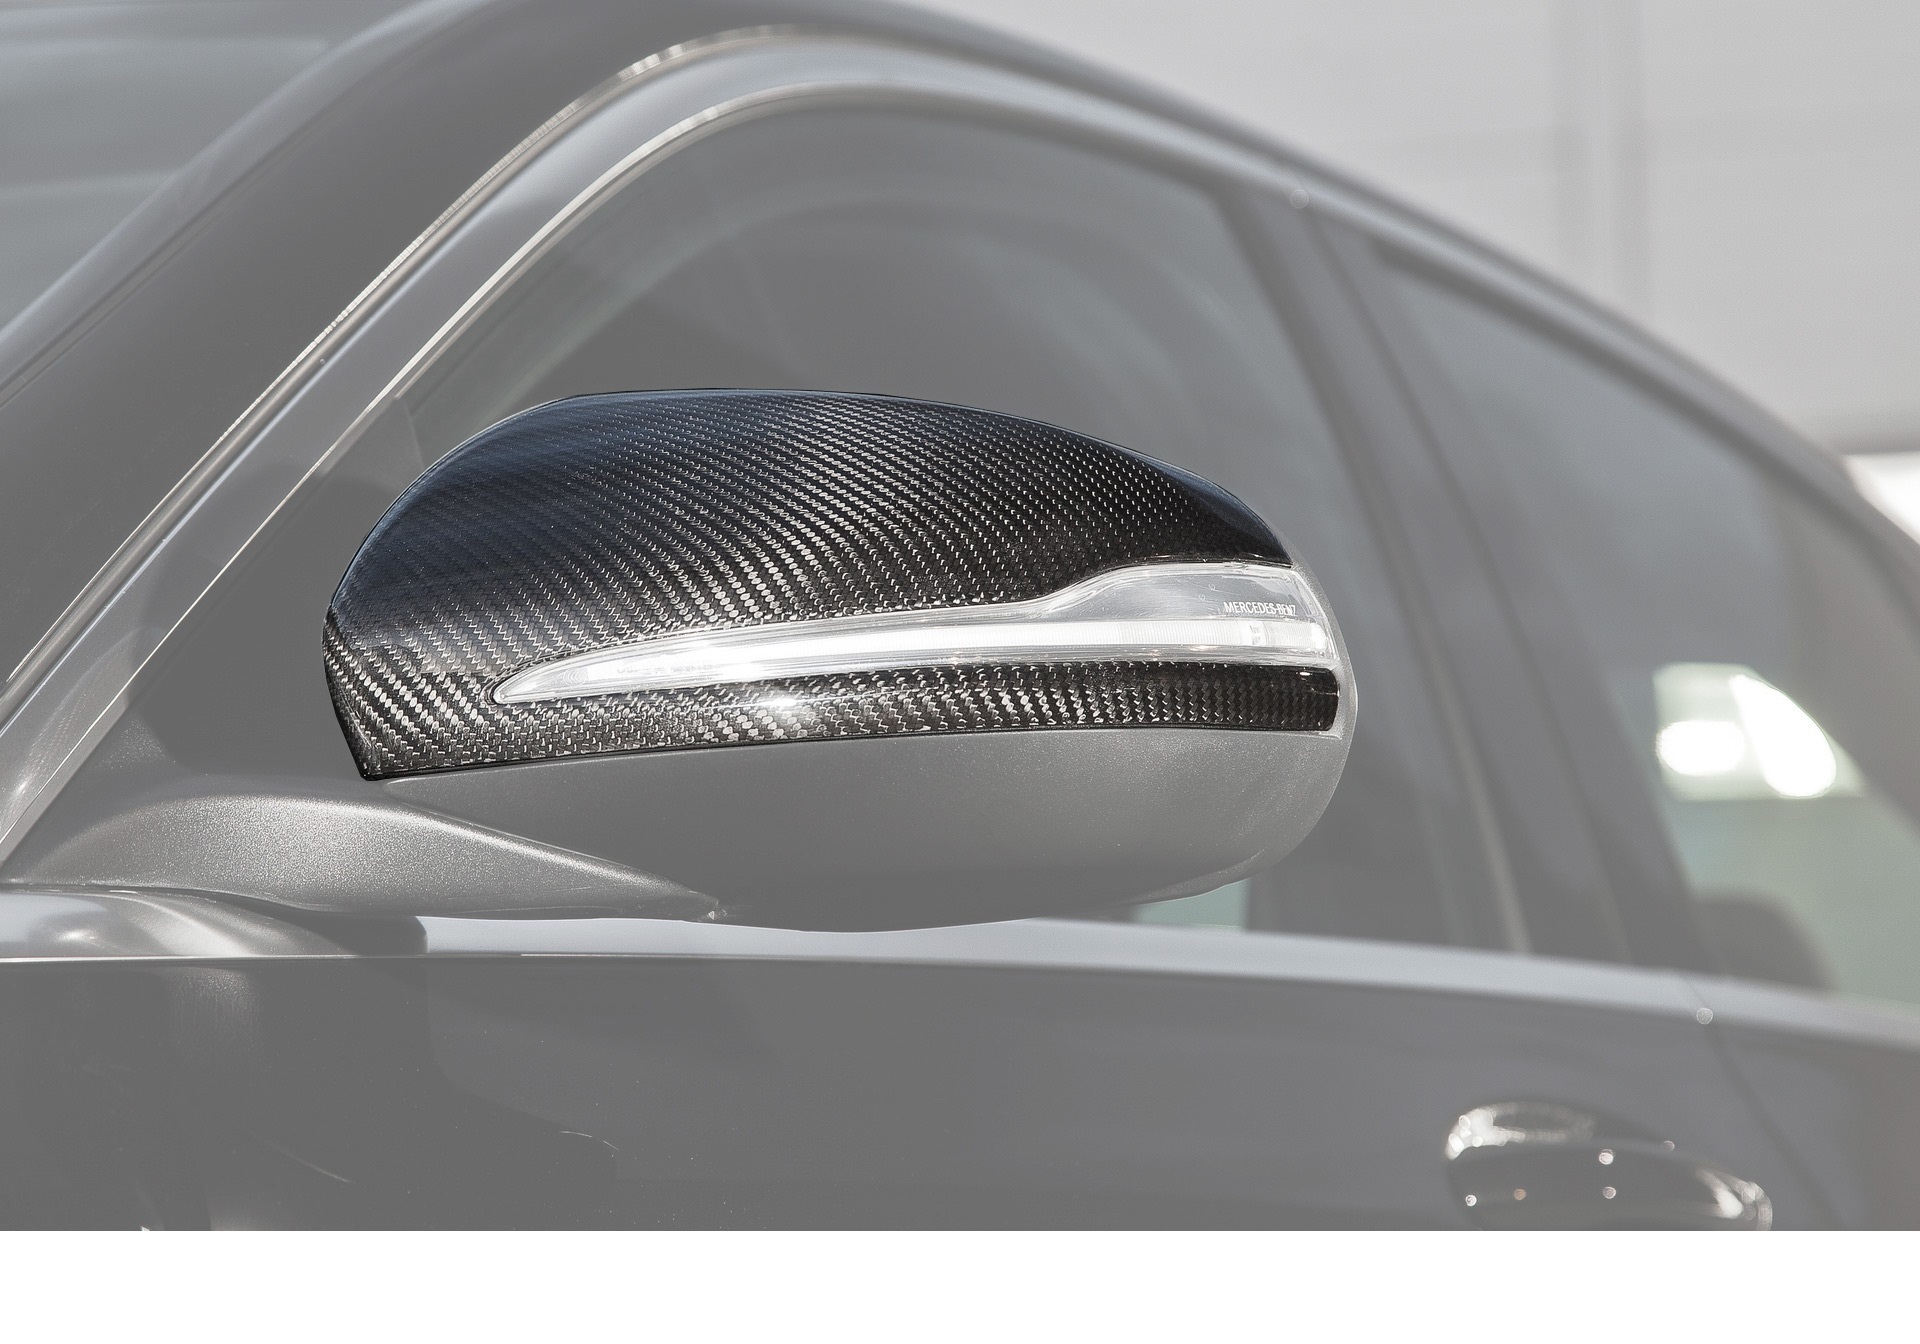 Hodoor Performance Carbon fiber mirror linings AMG Style for Mercedes C-class W205